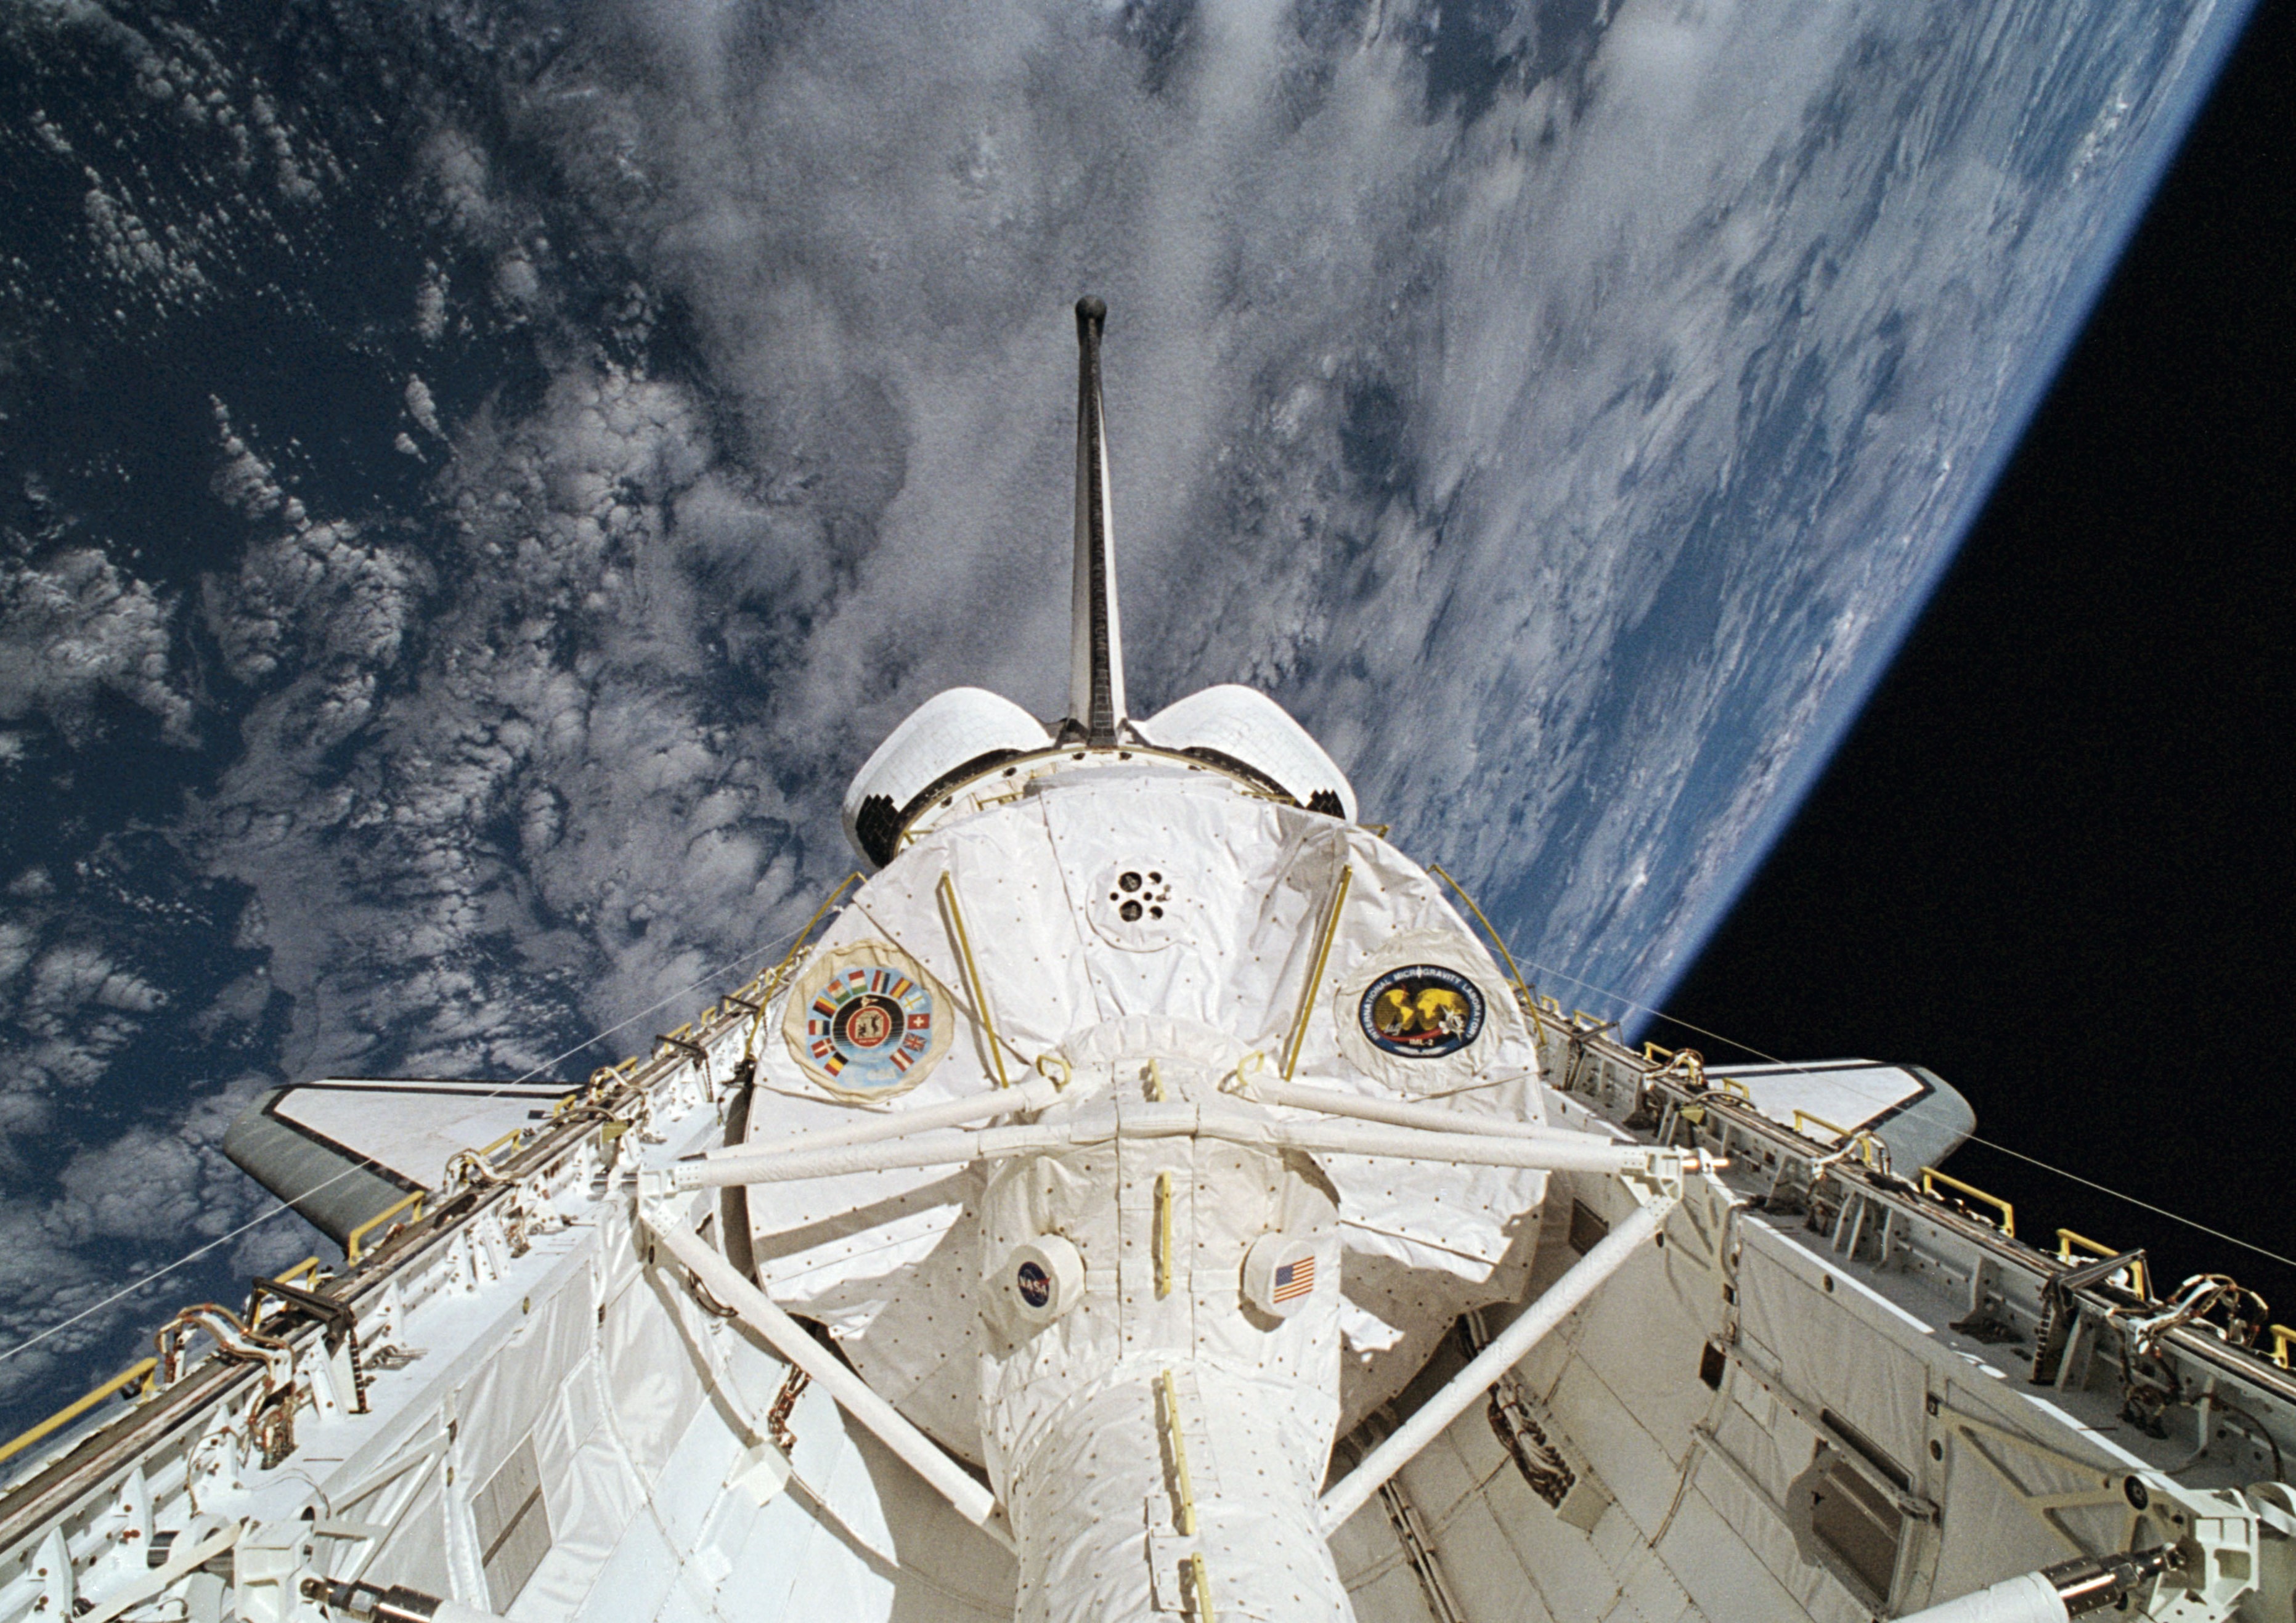 View of the Spacelab module in the shuttle’s payload bay